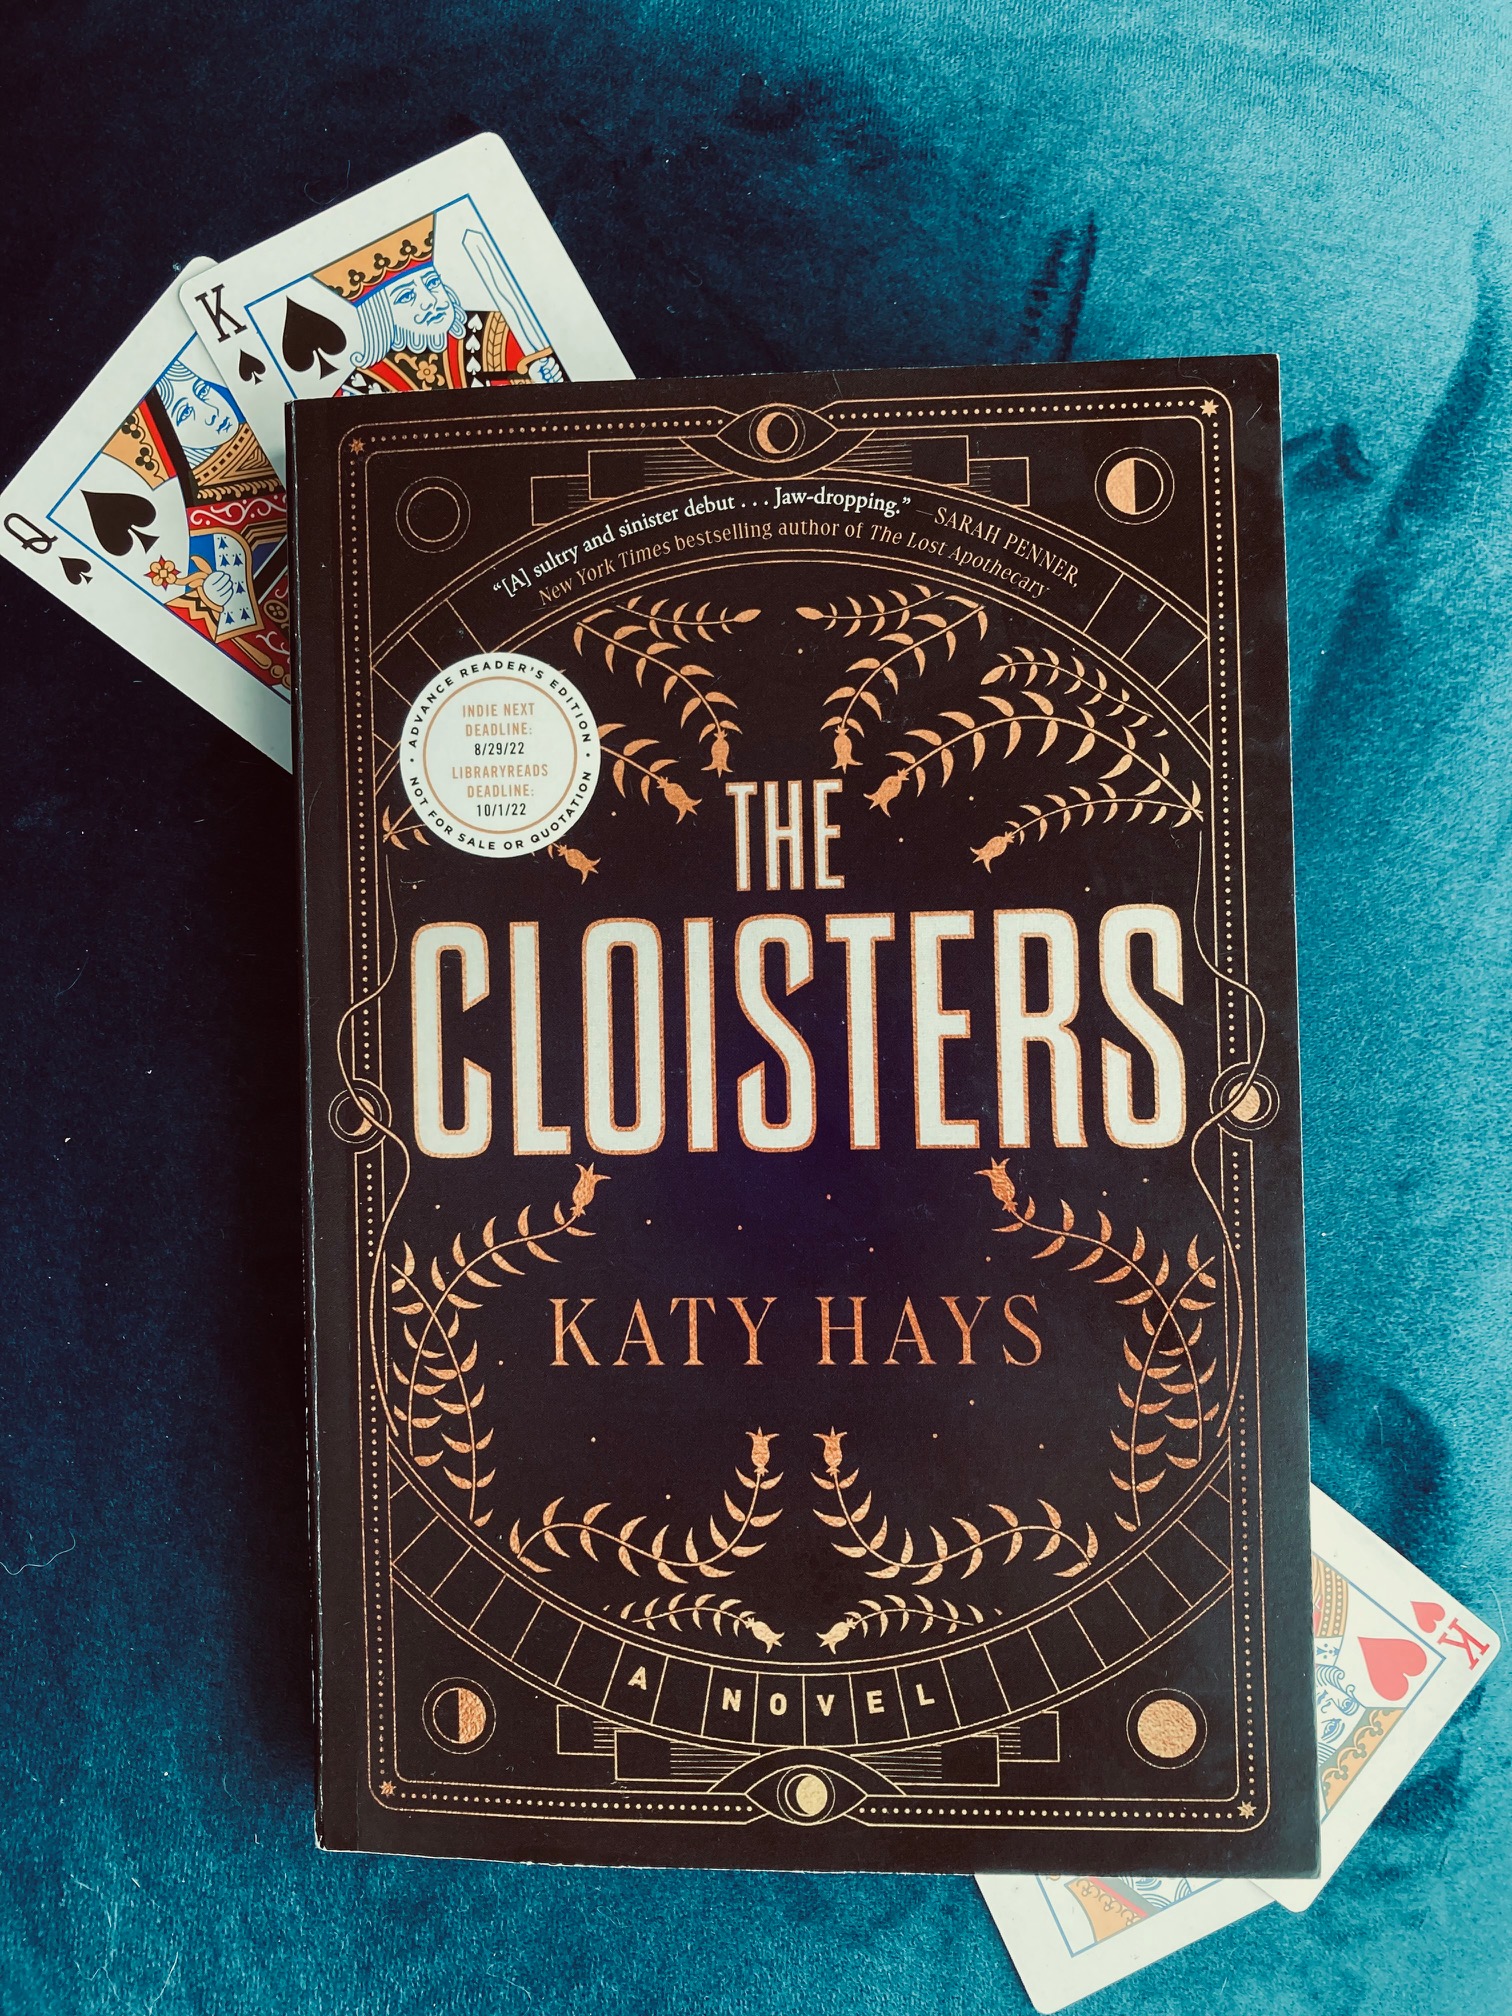 Picture of The Cloisters by Katy Hays book, on a navy blue background with four playing cards arranged behind the book